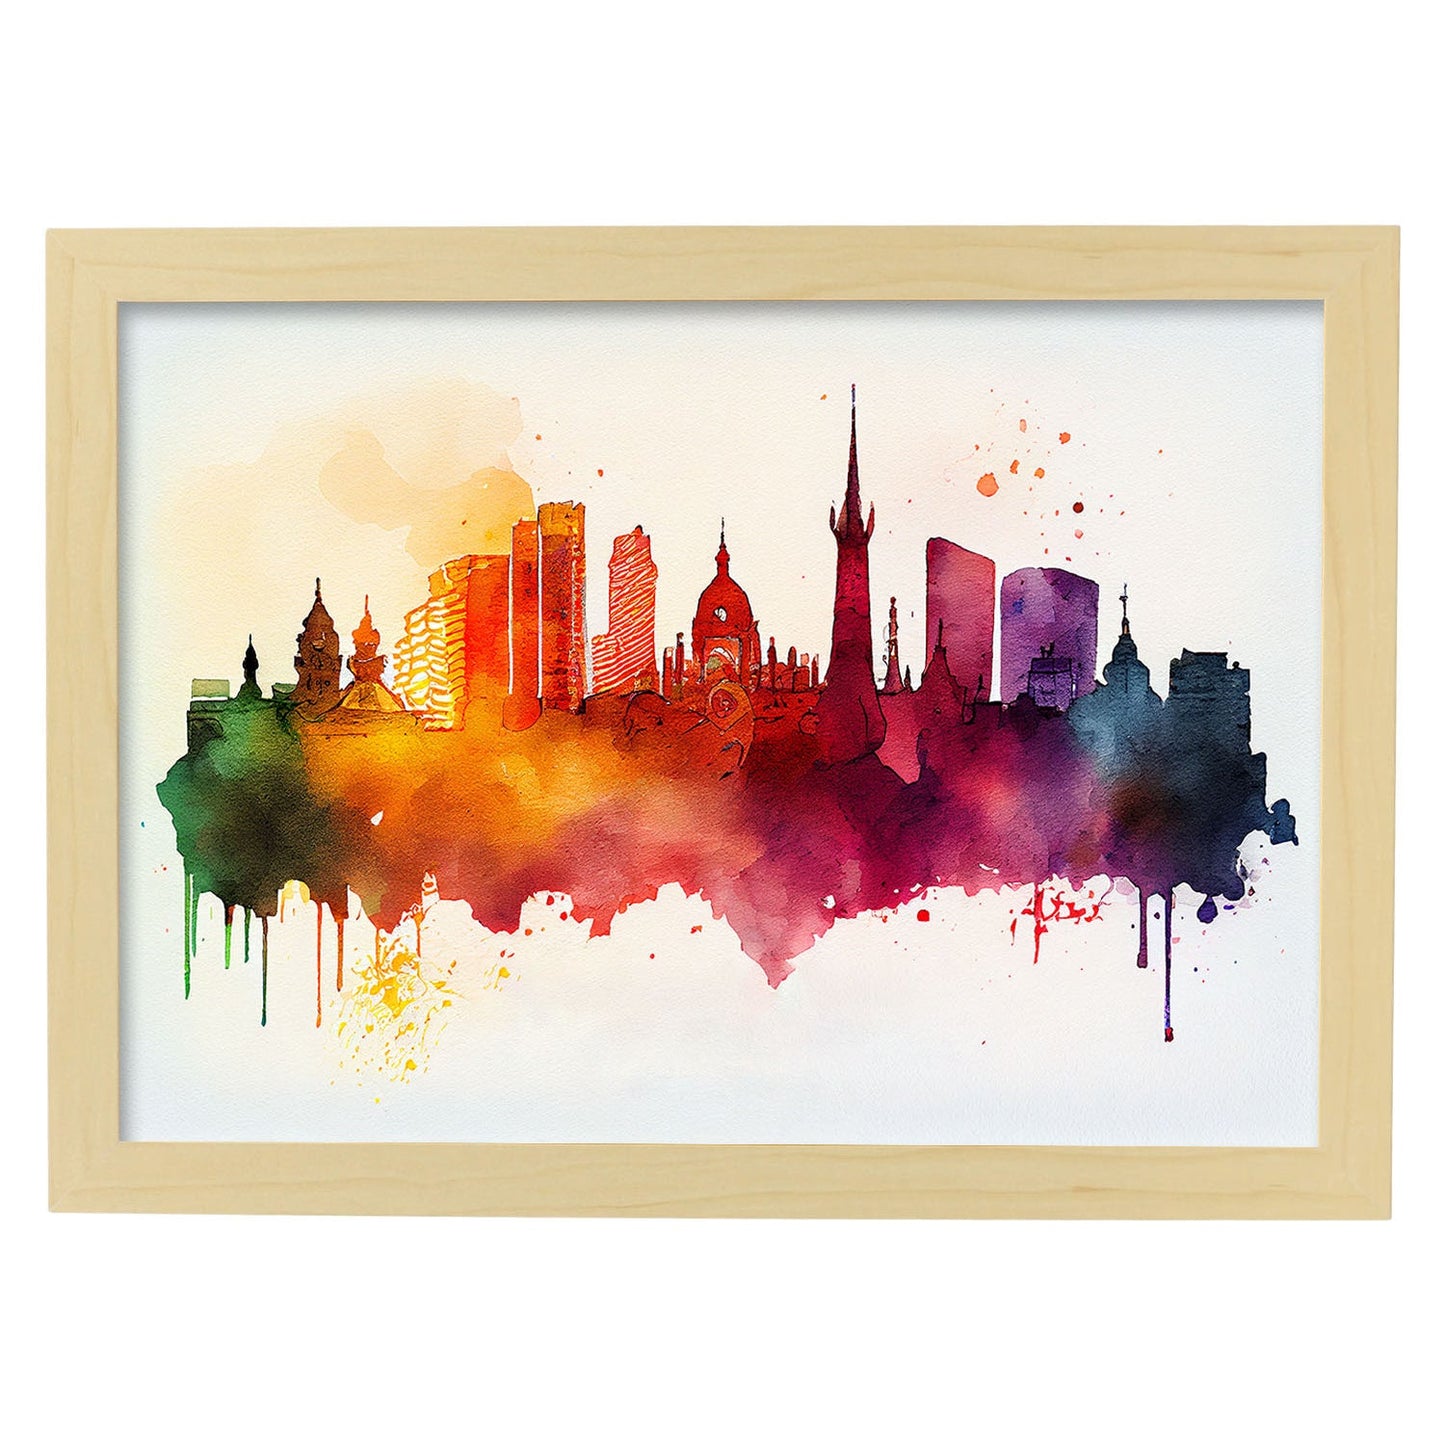 Nacnic watercolor of a skyline of the city of Madrid_2. Aesthetic Wall Art Prints for Bedroom or Living Room Design.-Artwork-Nacnic-A4-Marco Madera Clara-Nacnic Estudio SL